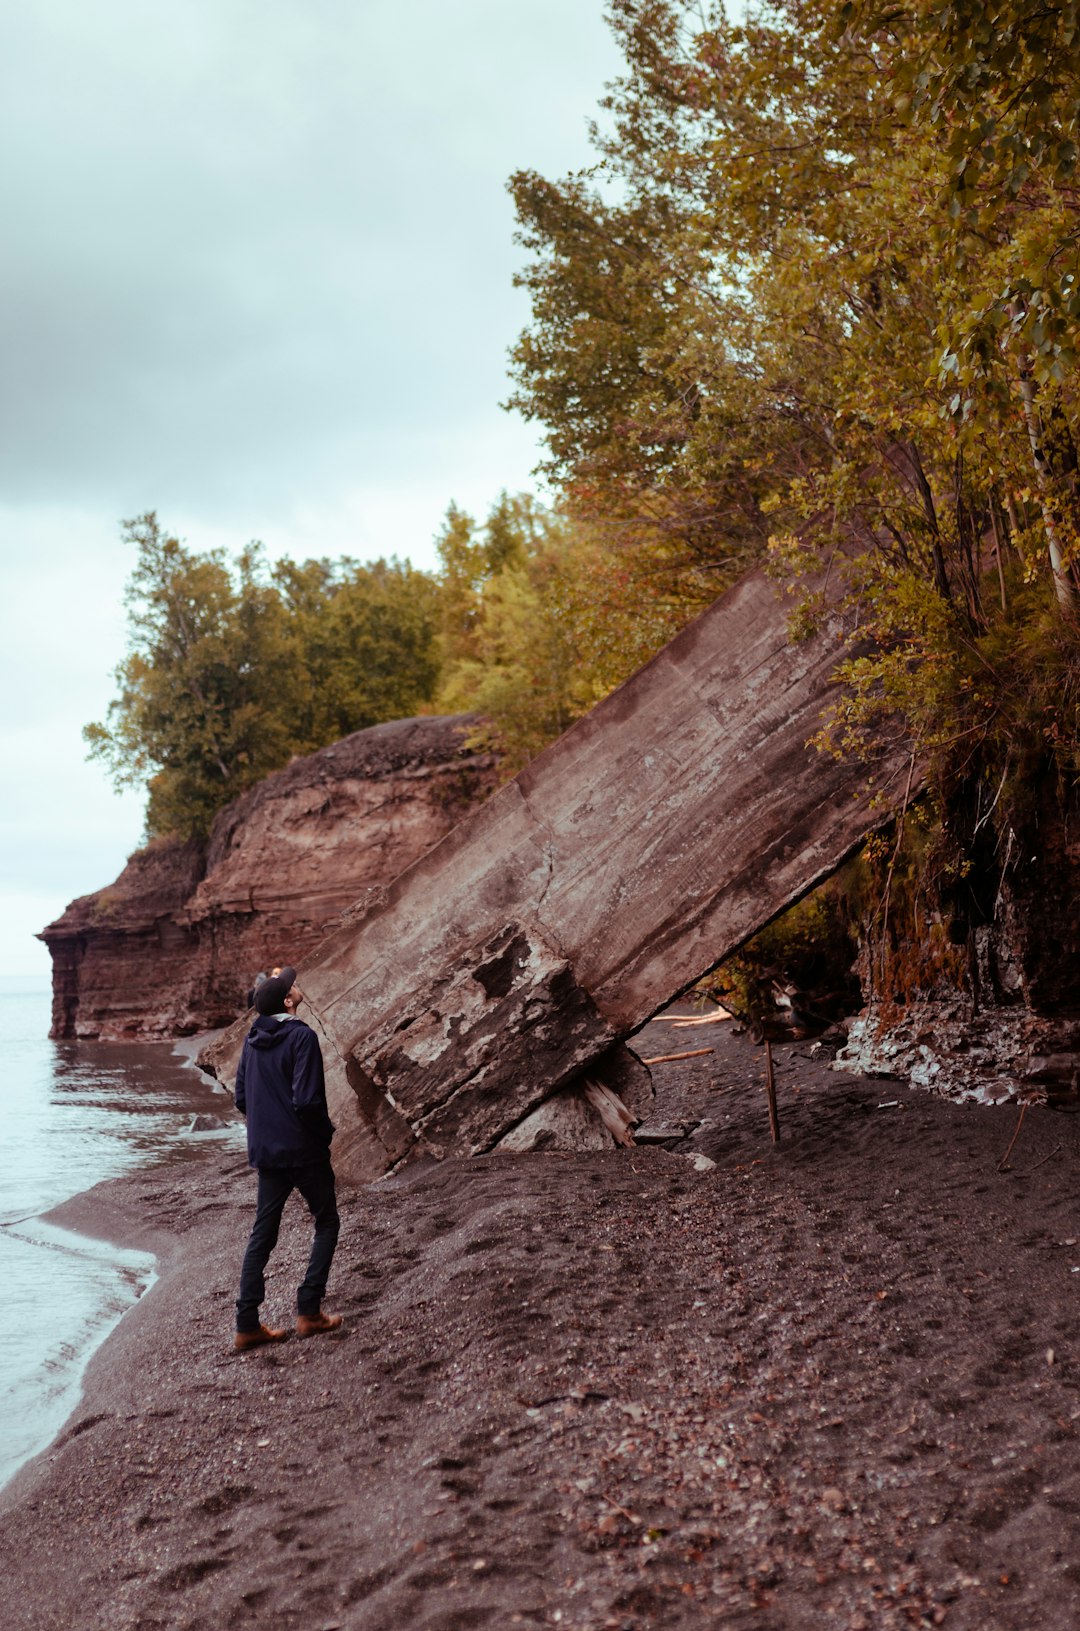 man in black jacket standing on brown rock near body of water during daytime